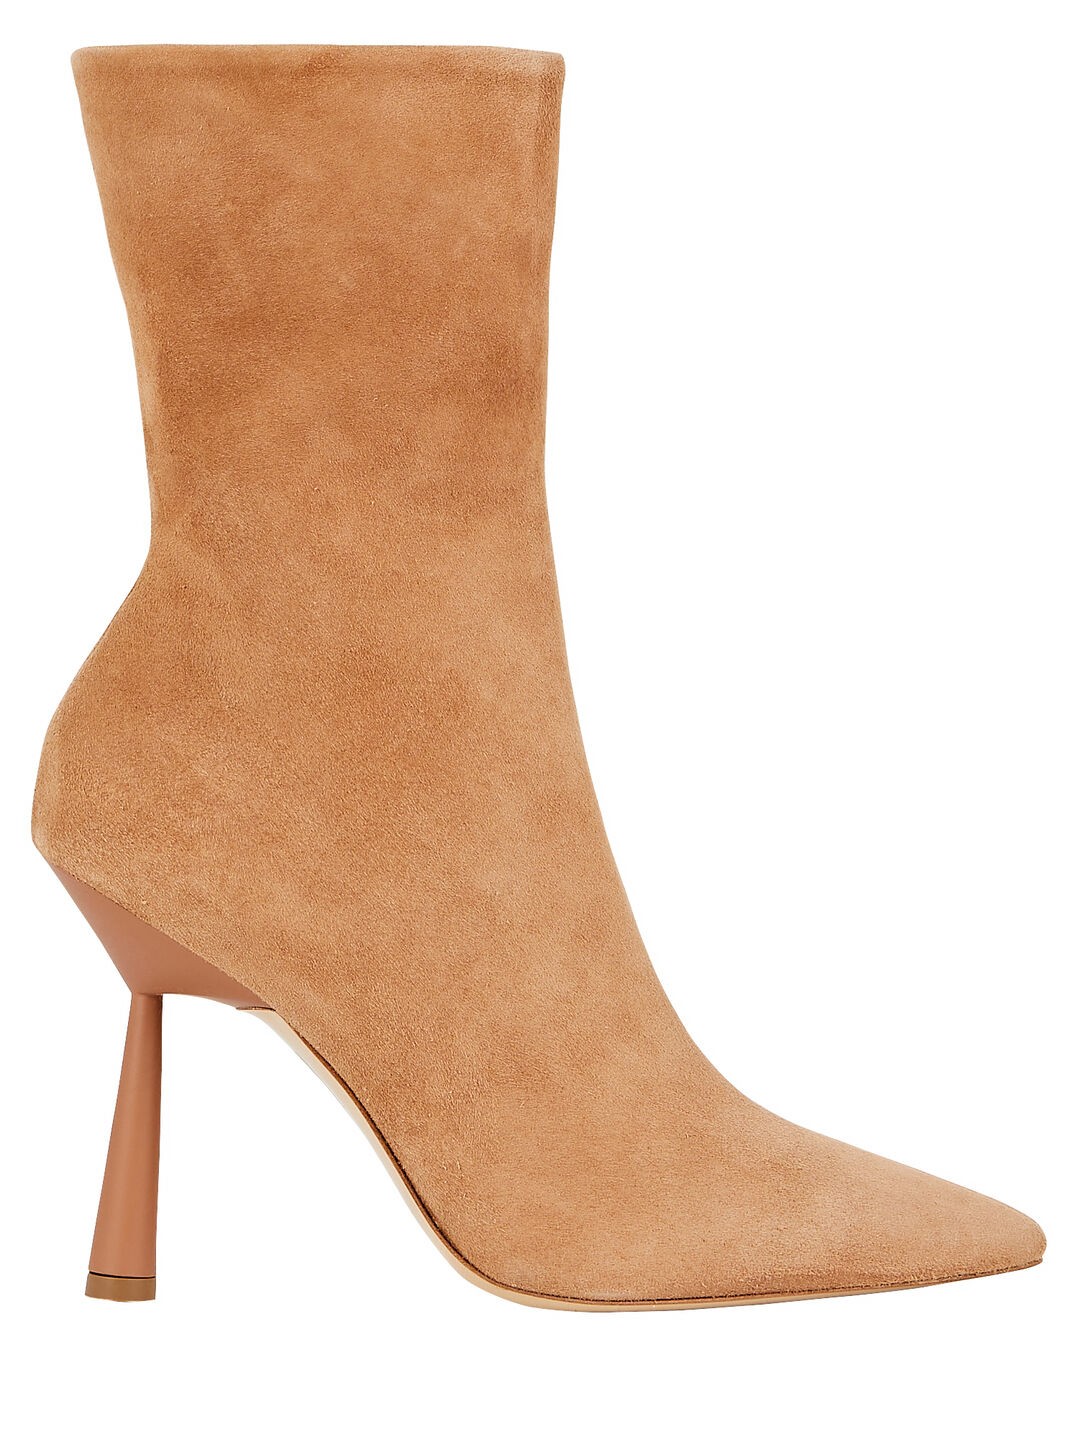 X RHW Rosie Suede Ankle Boots